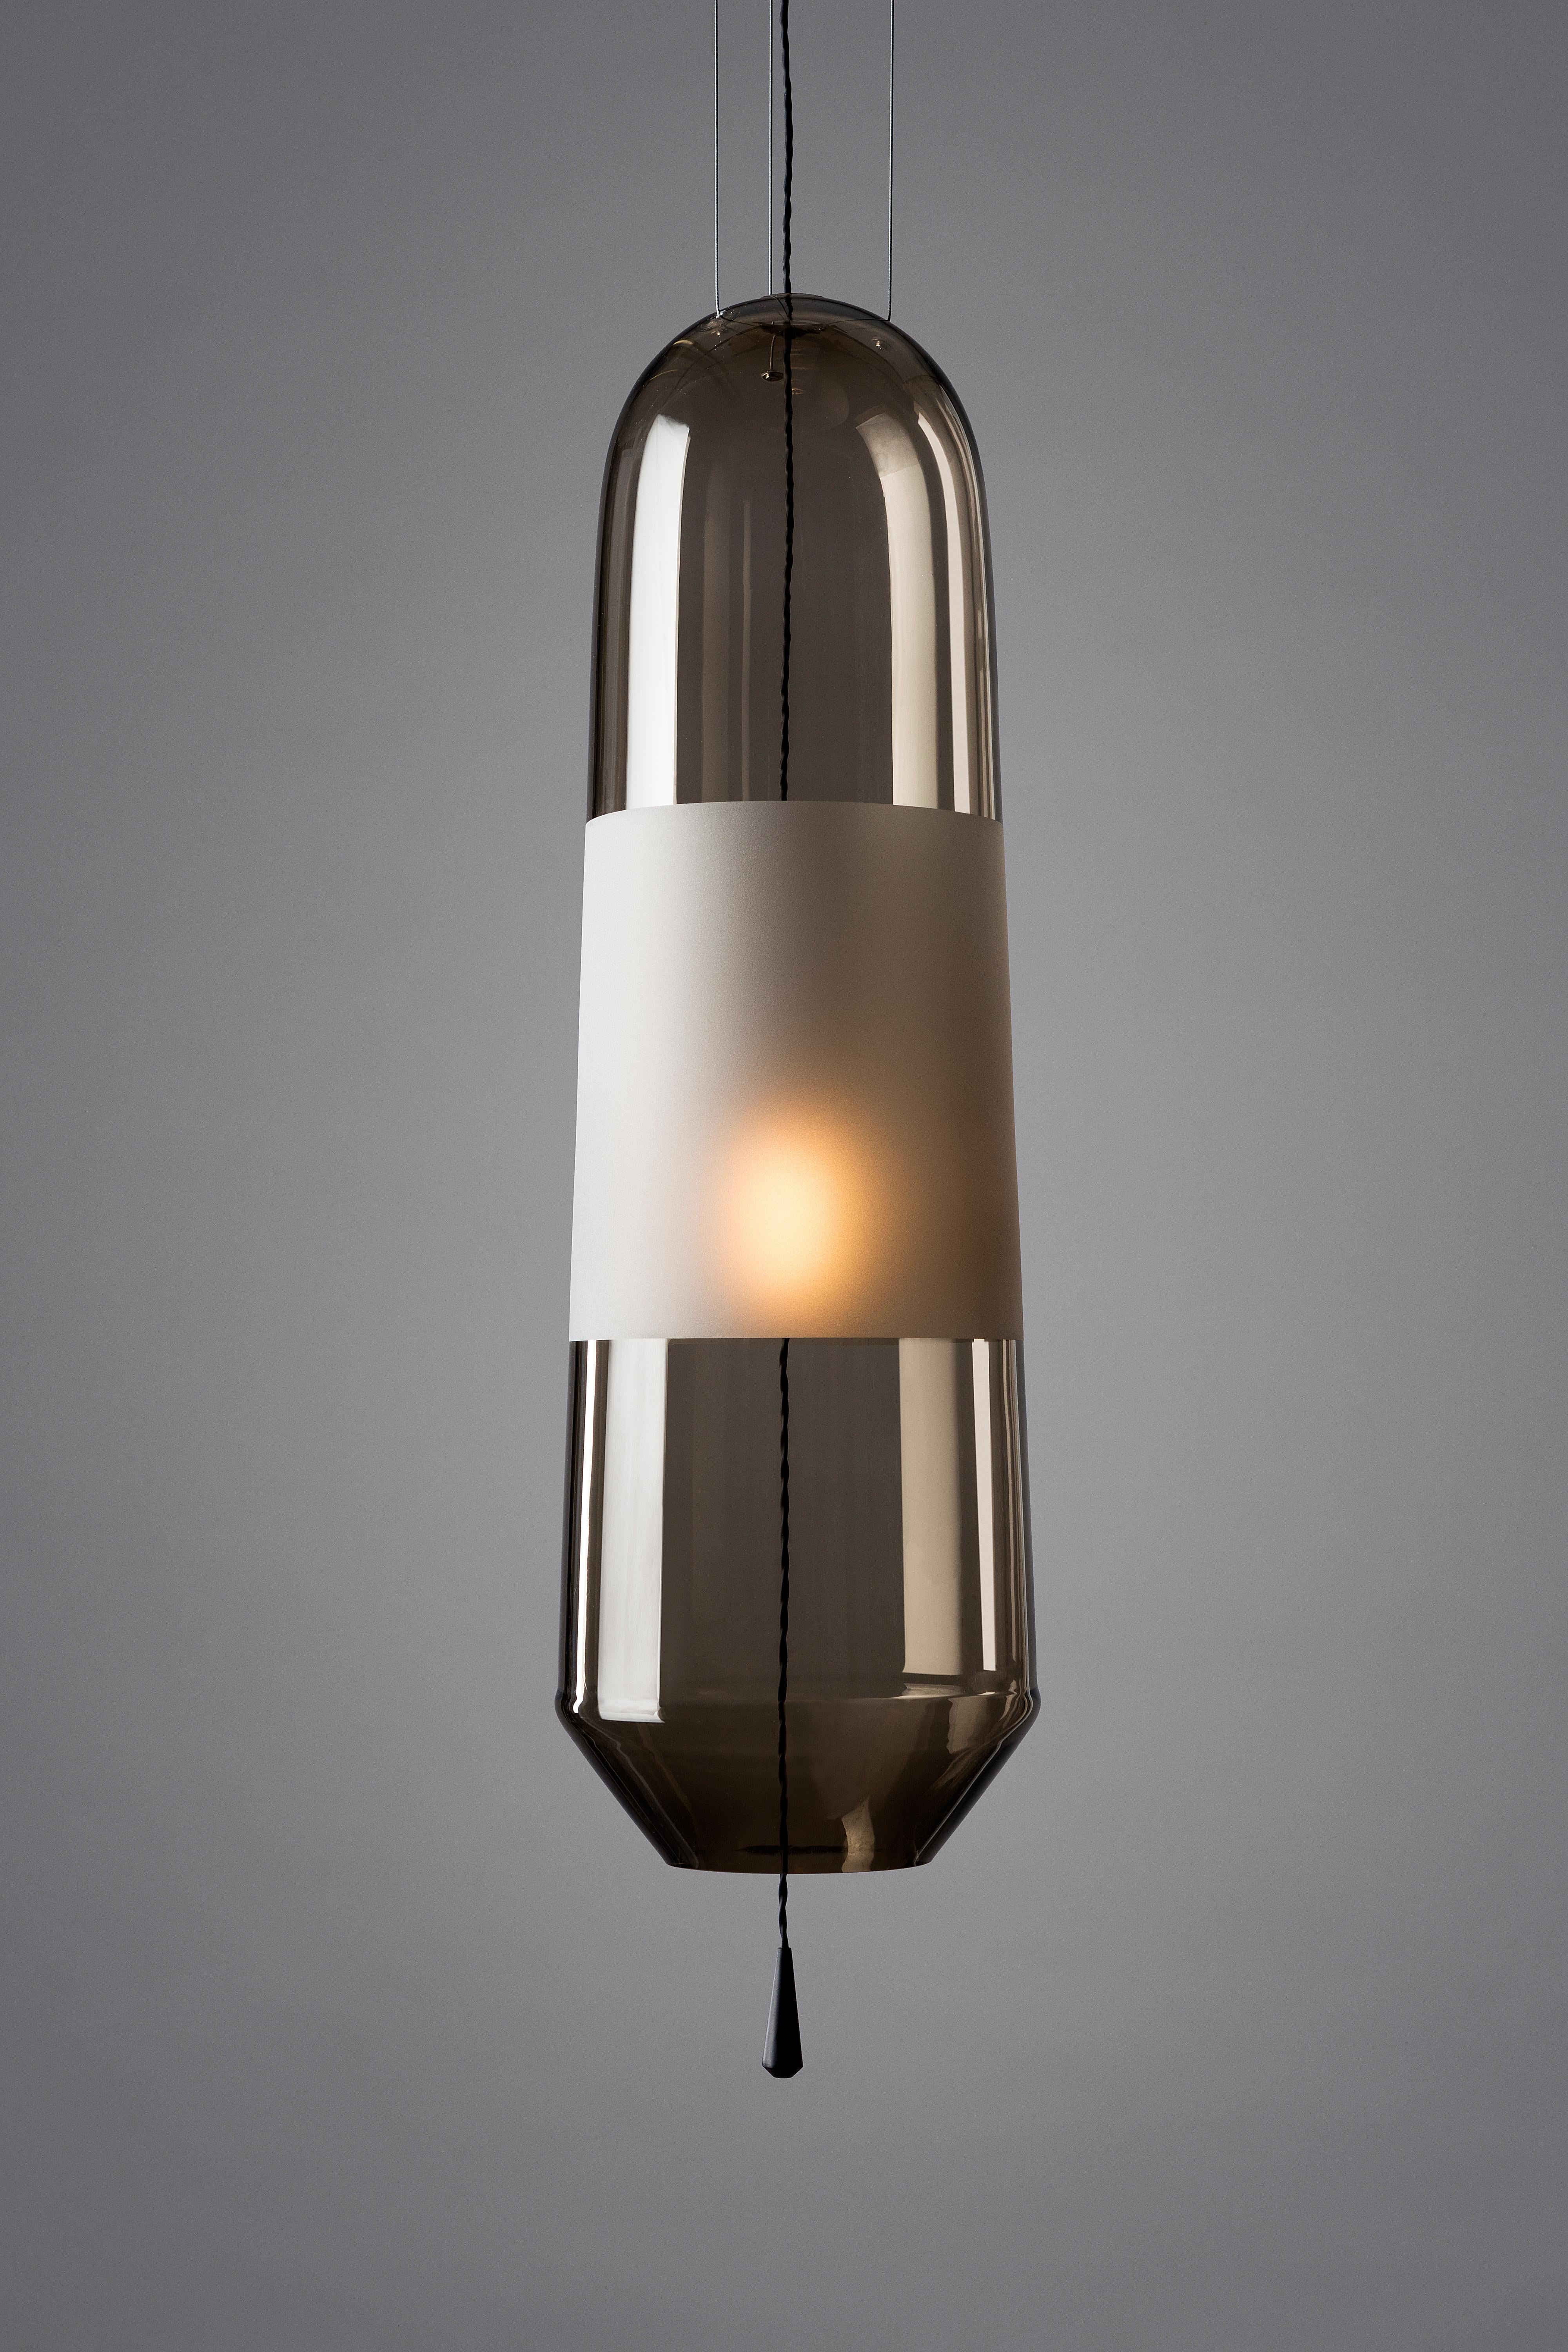 Our limpid light size L in shade “Smoke” is a pendant light, decorative light, made in Europe.
The Limpid Lights collection, a series of lighting objects that incorporate movement as a key element of its design.
By moving the light source away from,